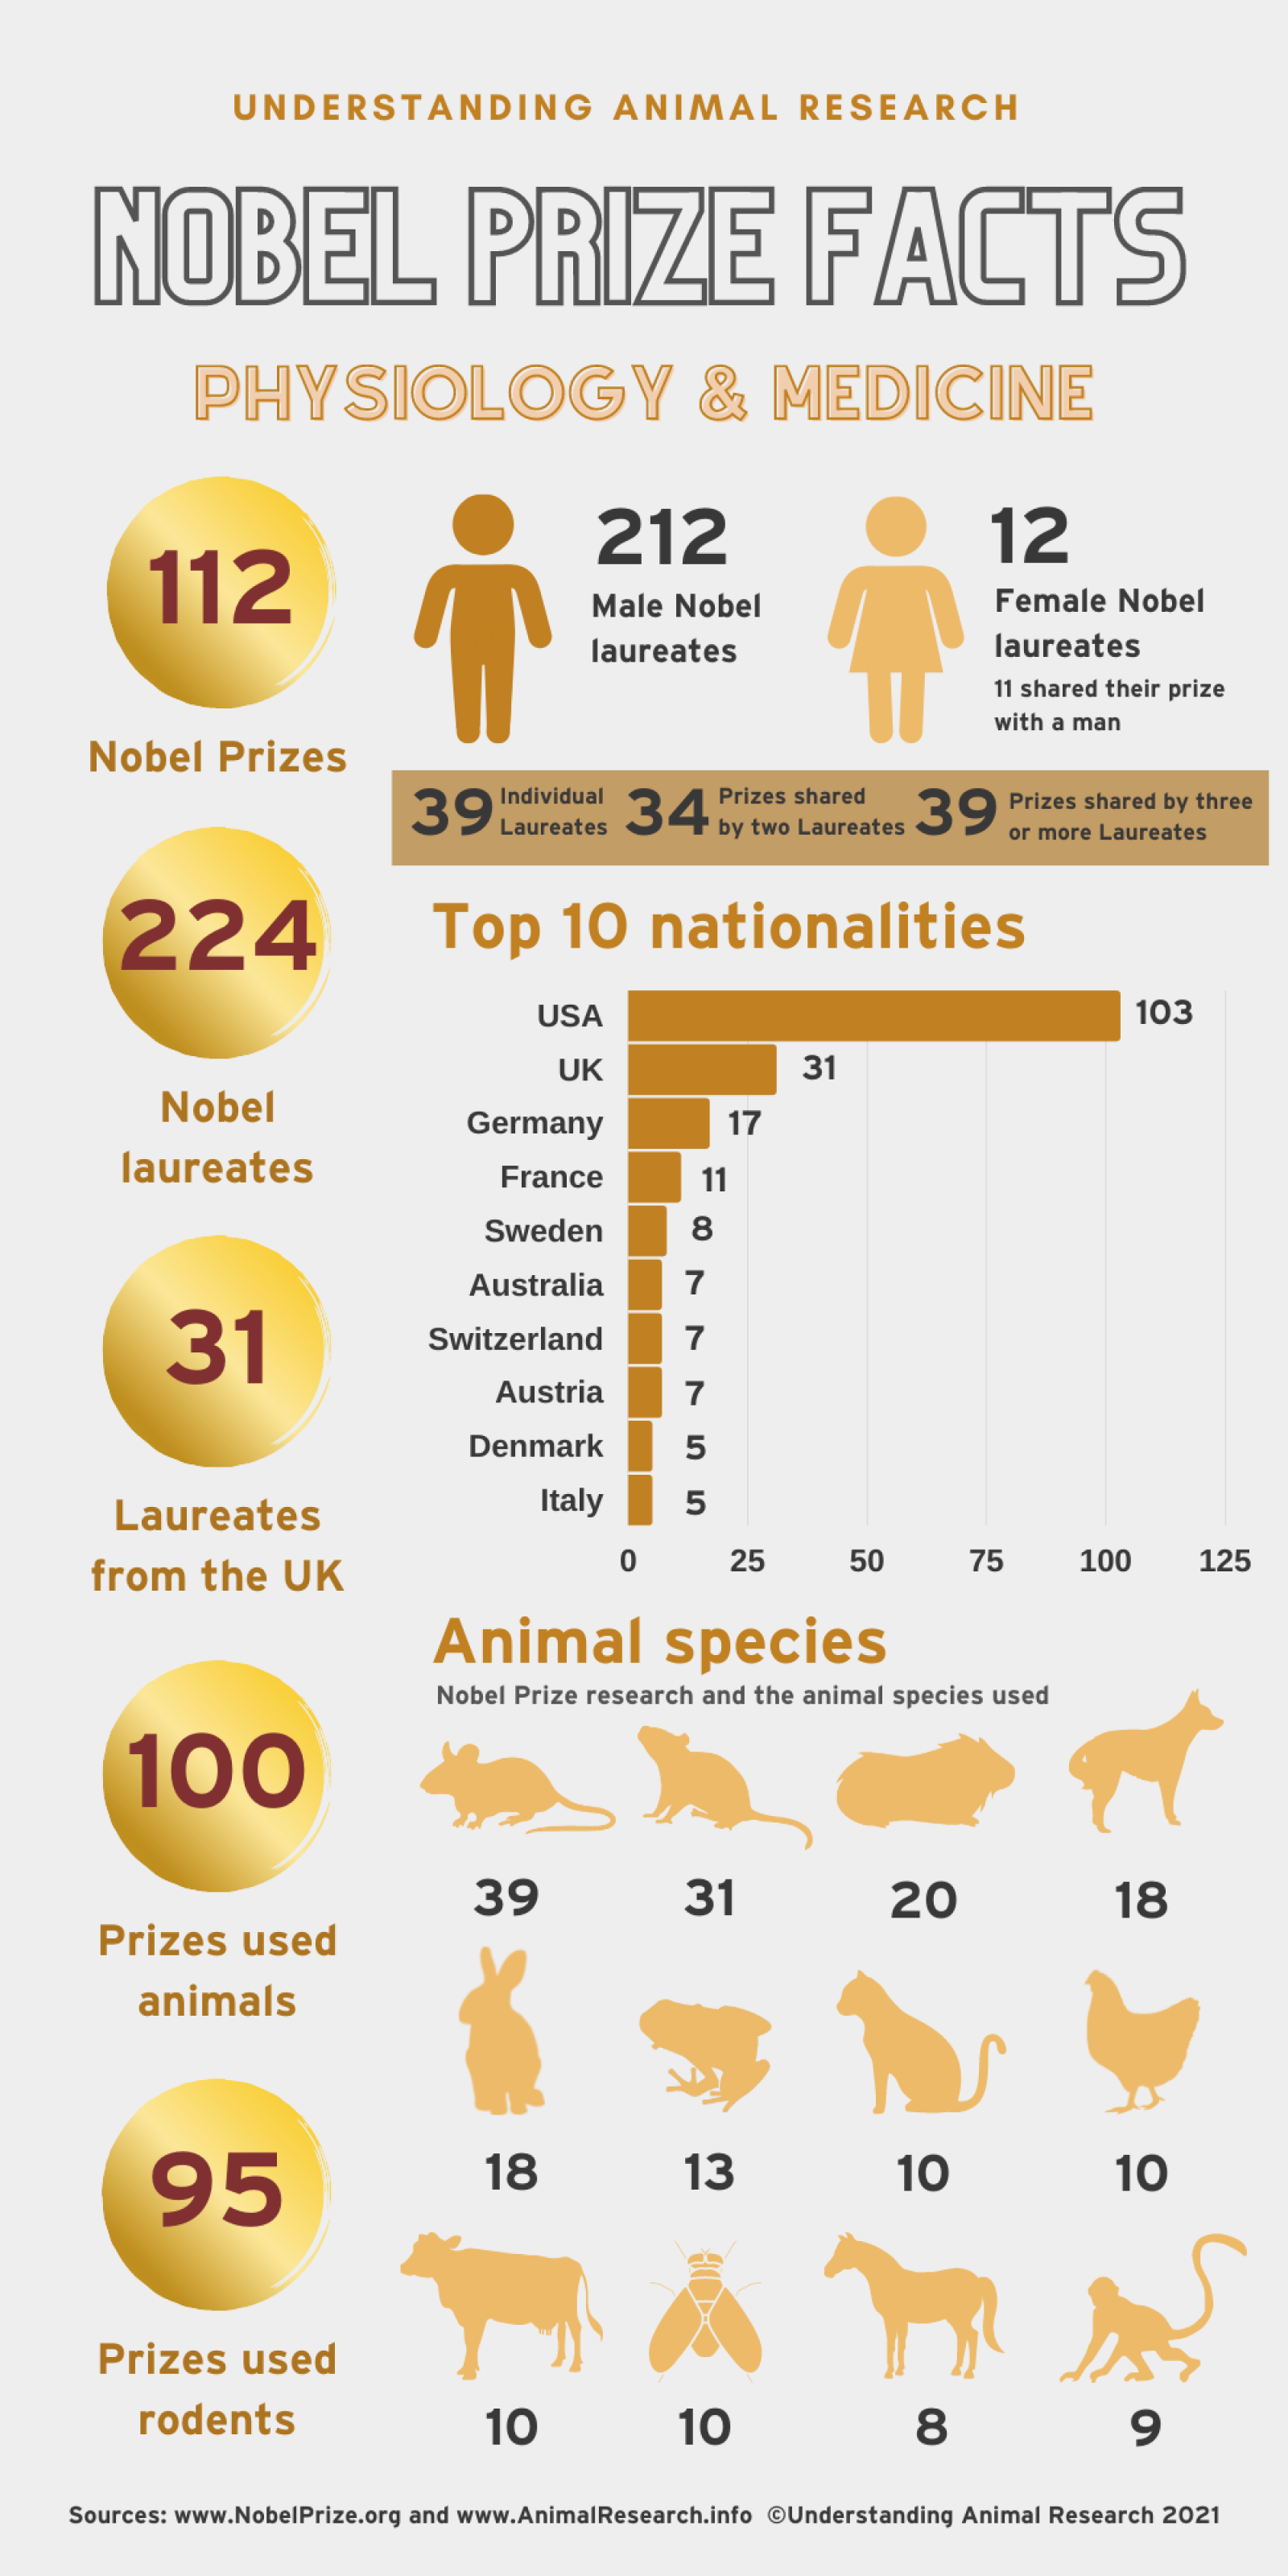 Animal research and Nobel Prizes